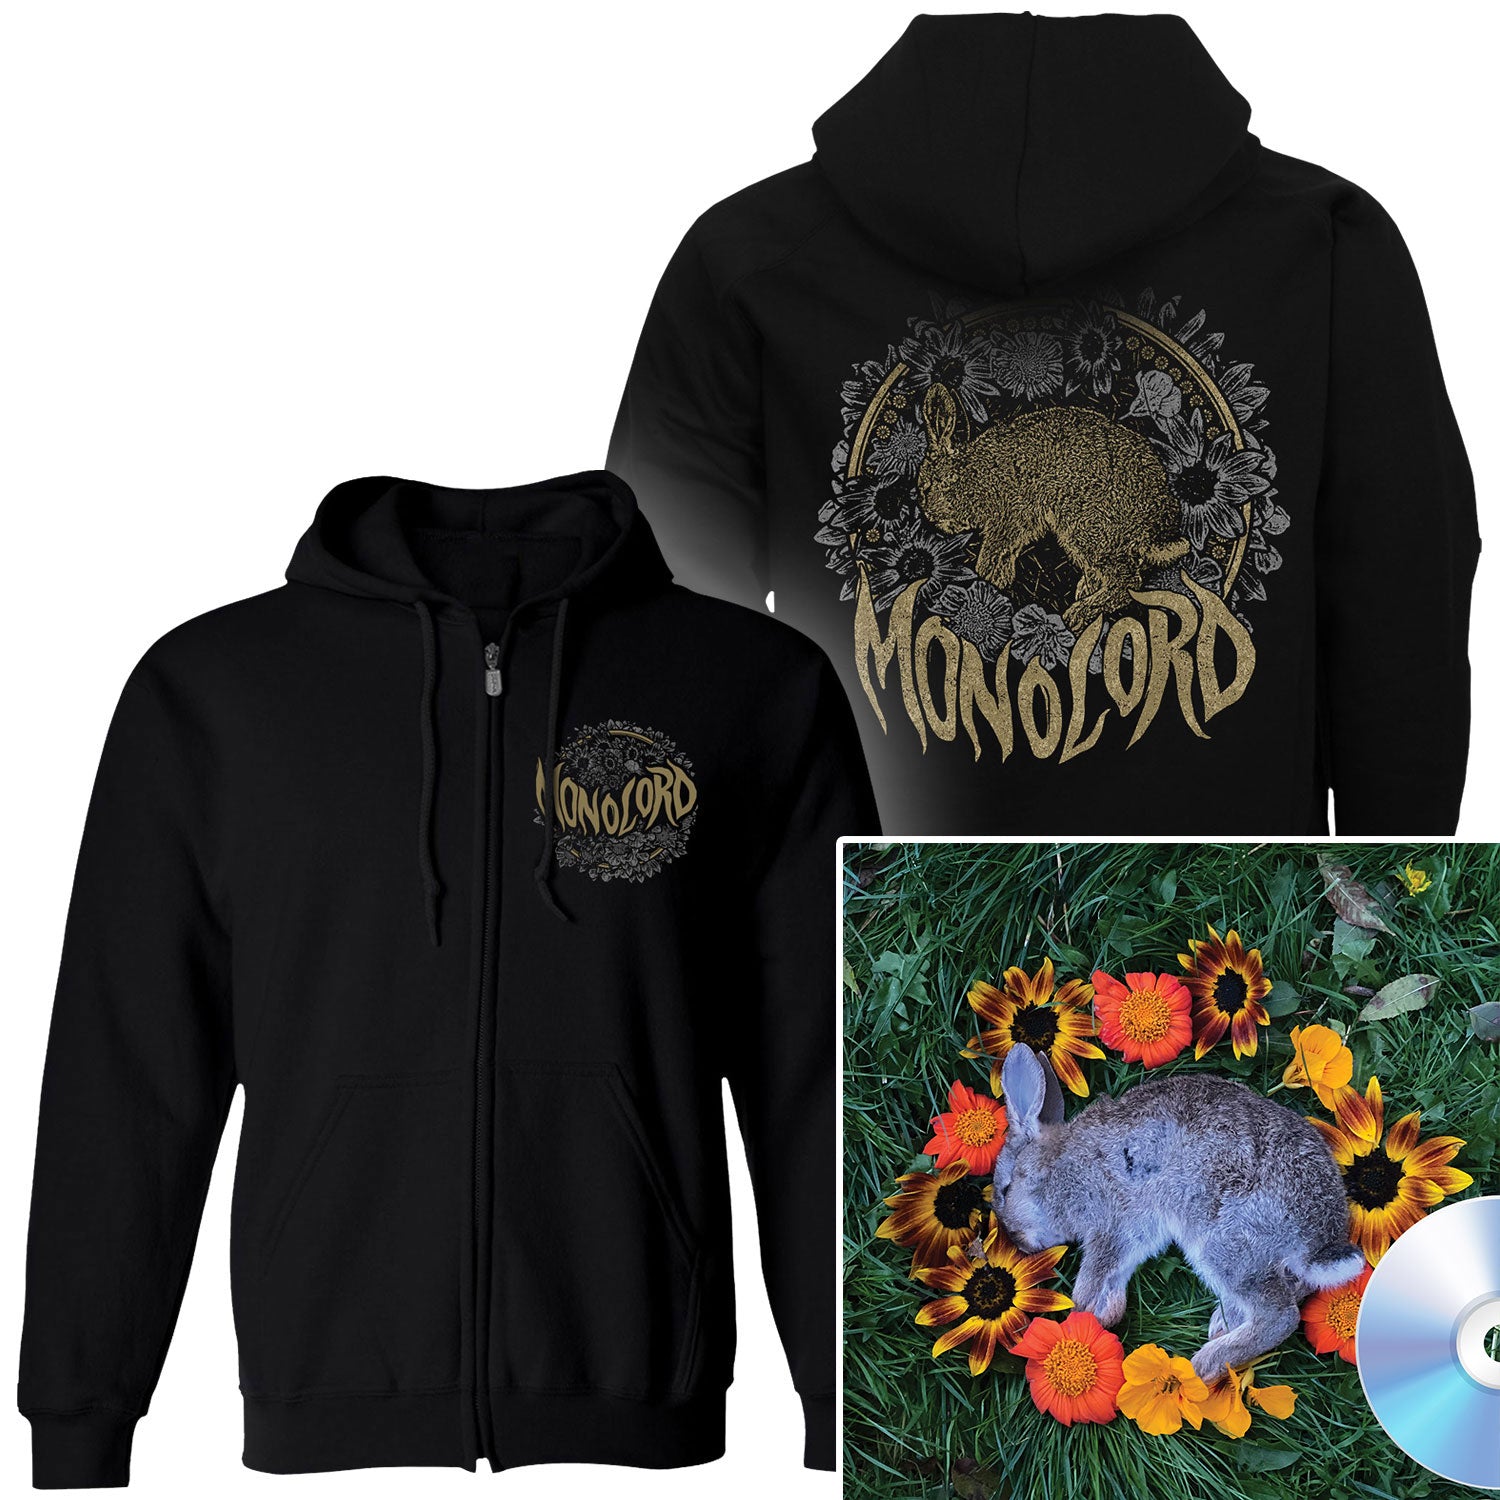 Monolord "Your Time To Shine Zip Up Hoodie + CD Bundle" Bundle